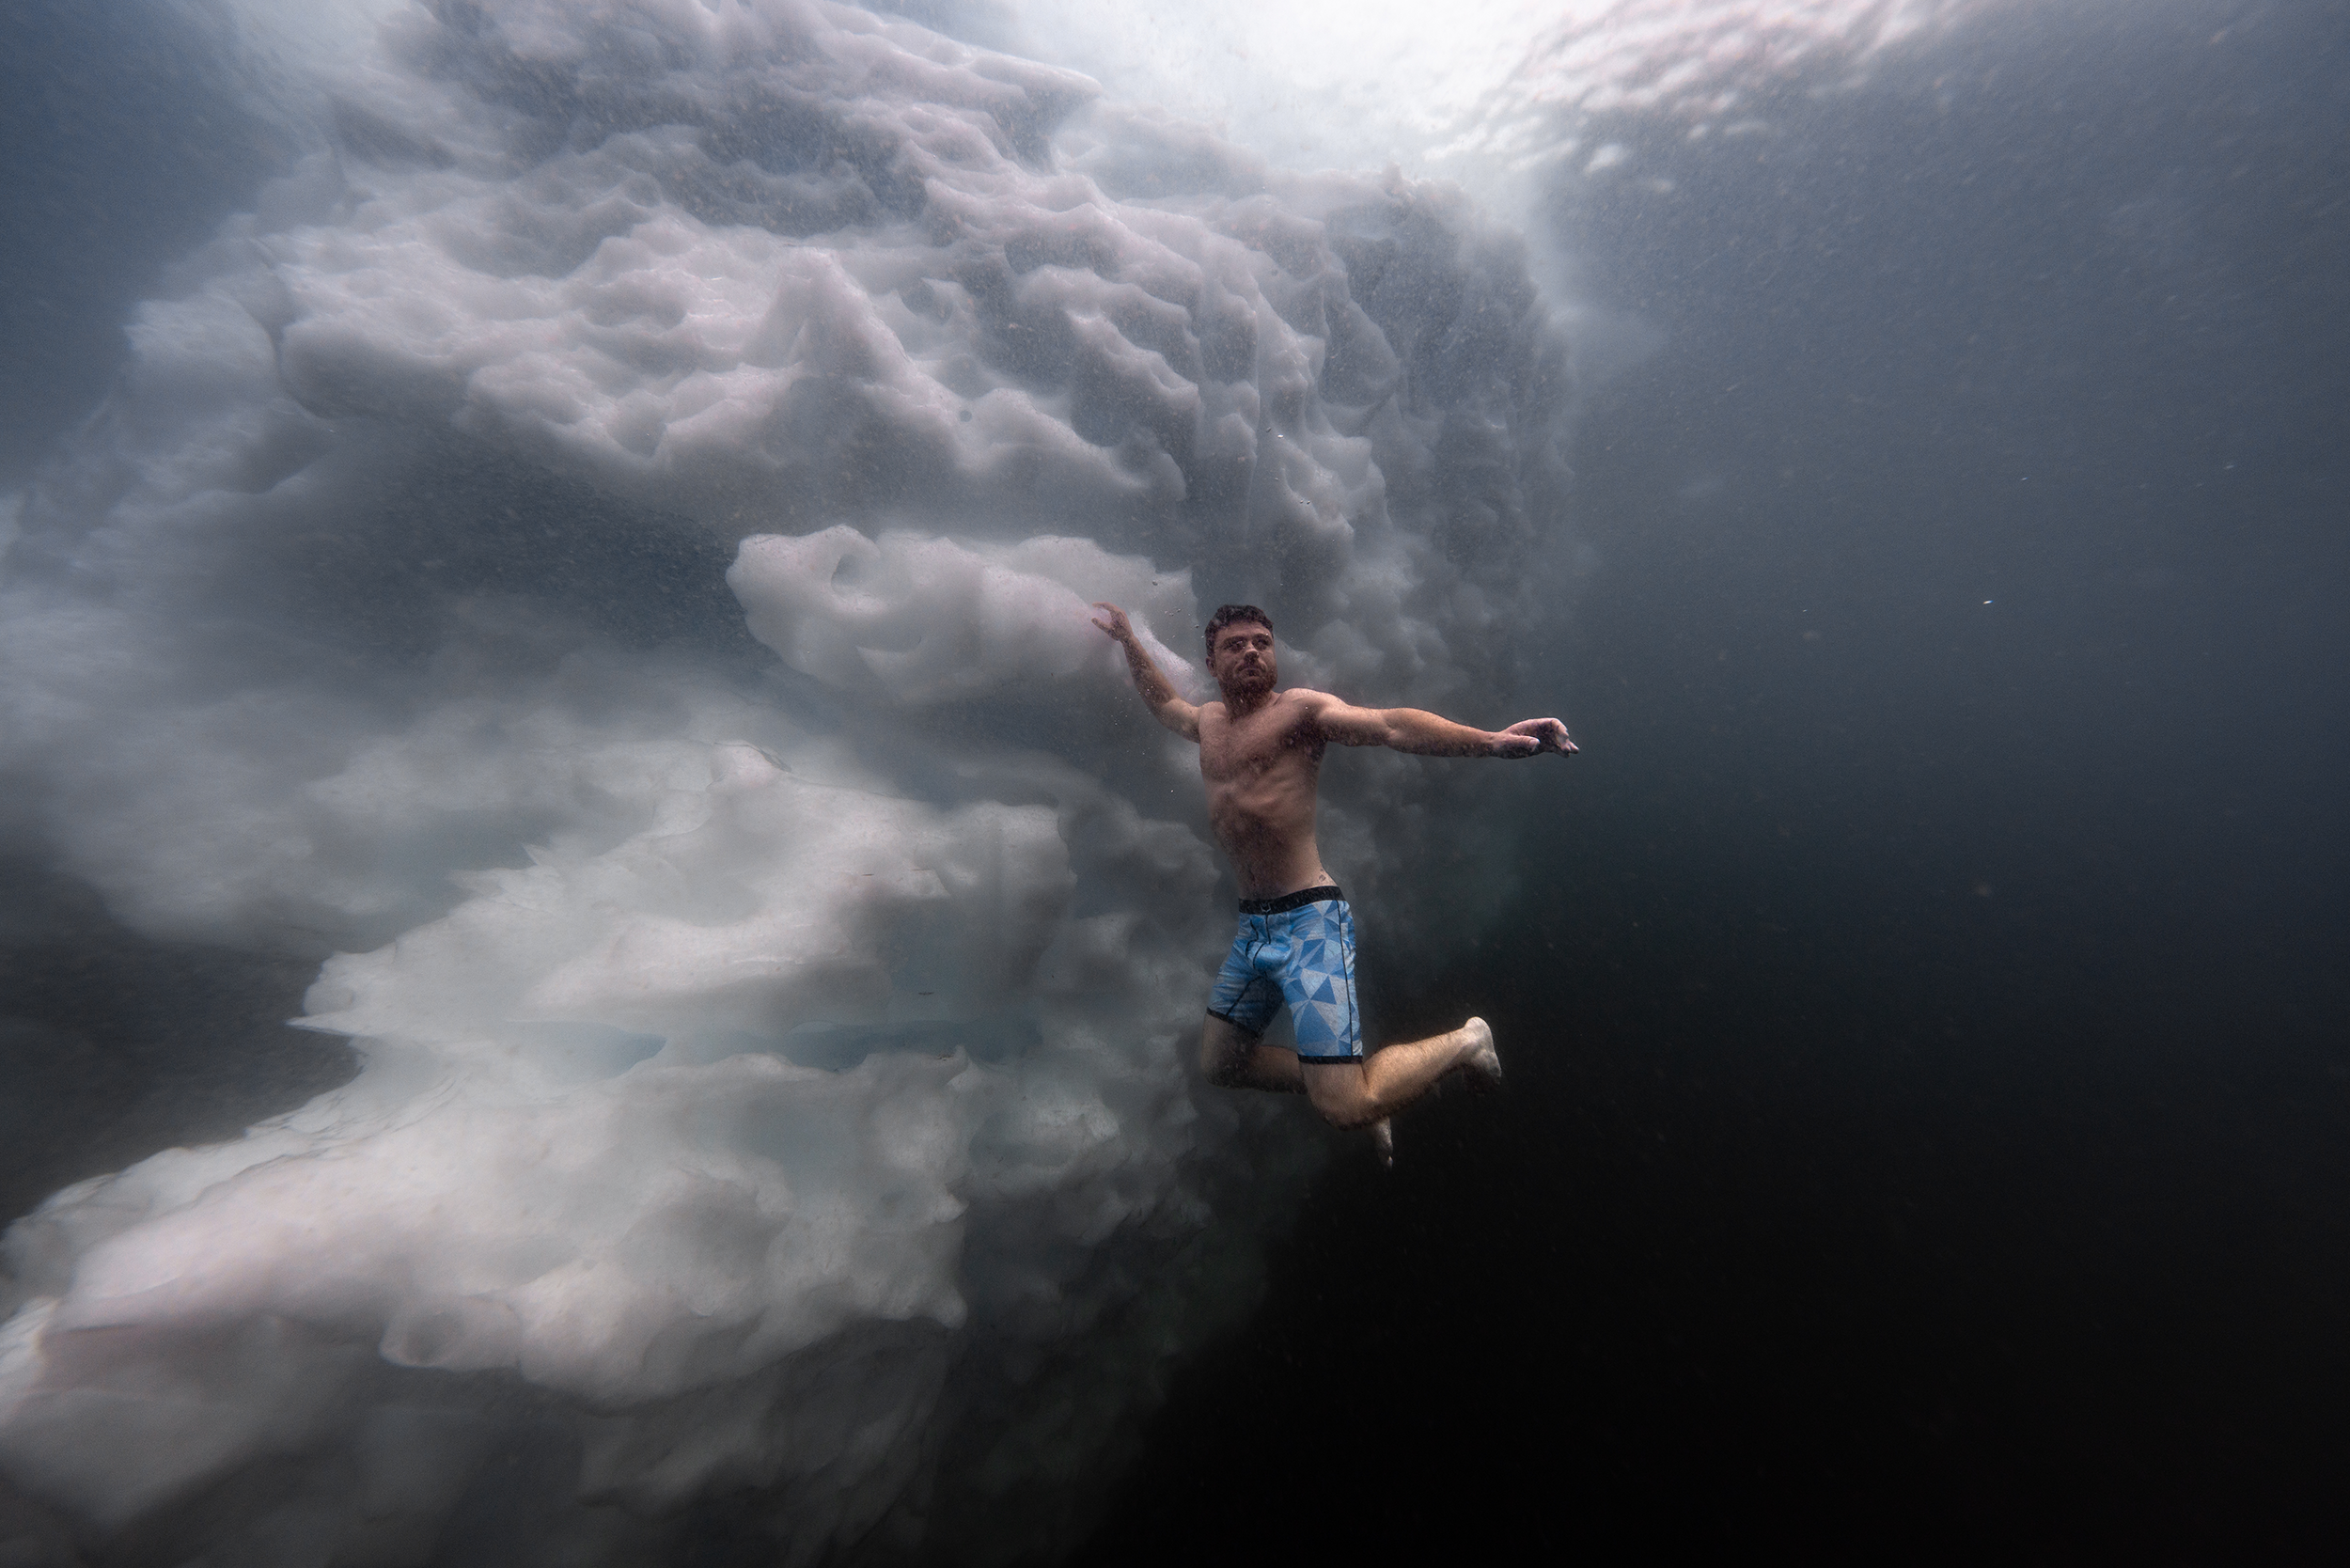 Adams freediving under a glacier with no oxygen tank, wetsuit, or mask — in 28-degree Fahrenheit water.